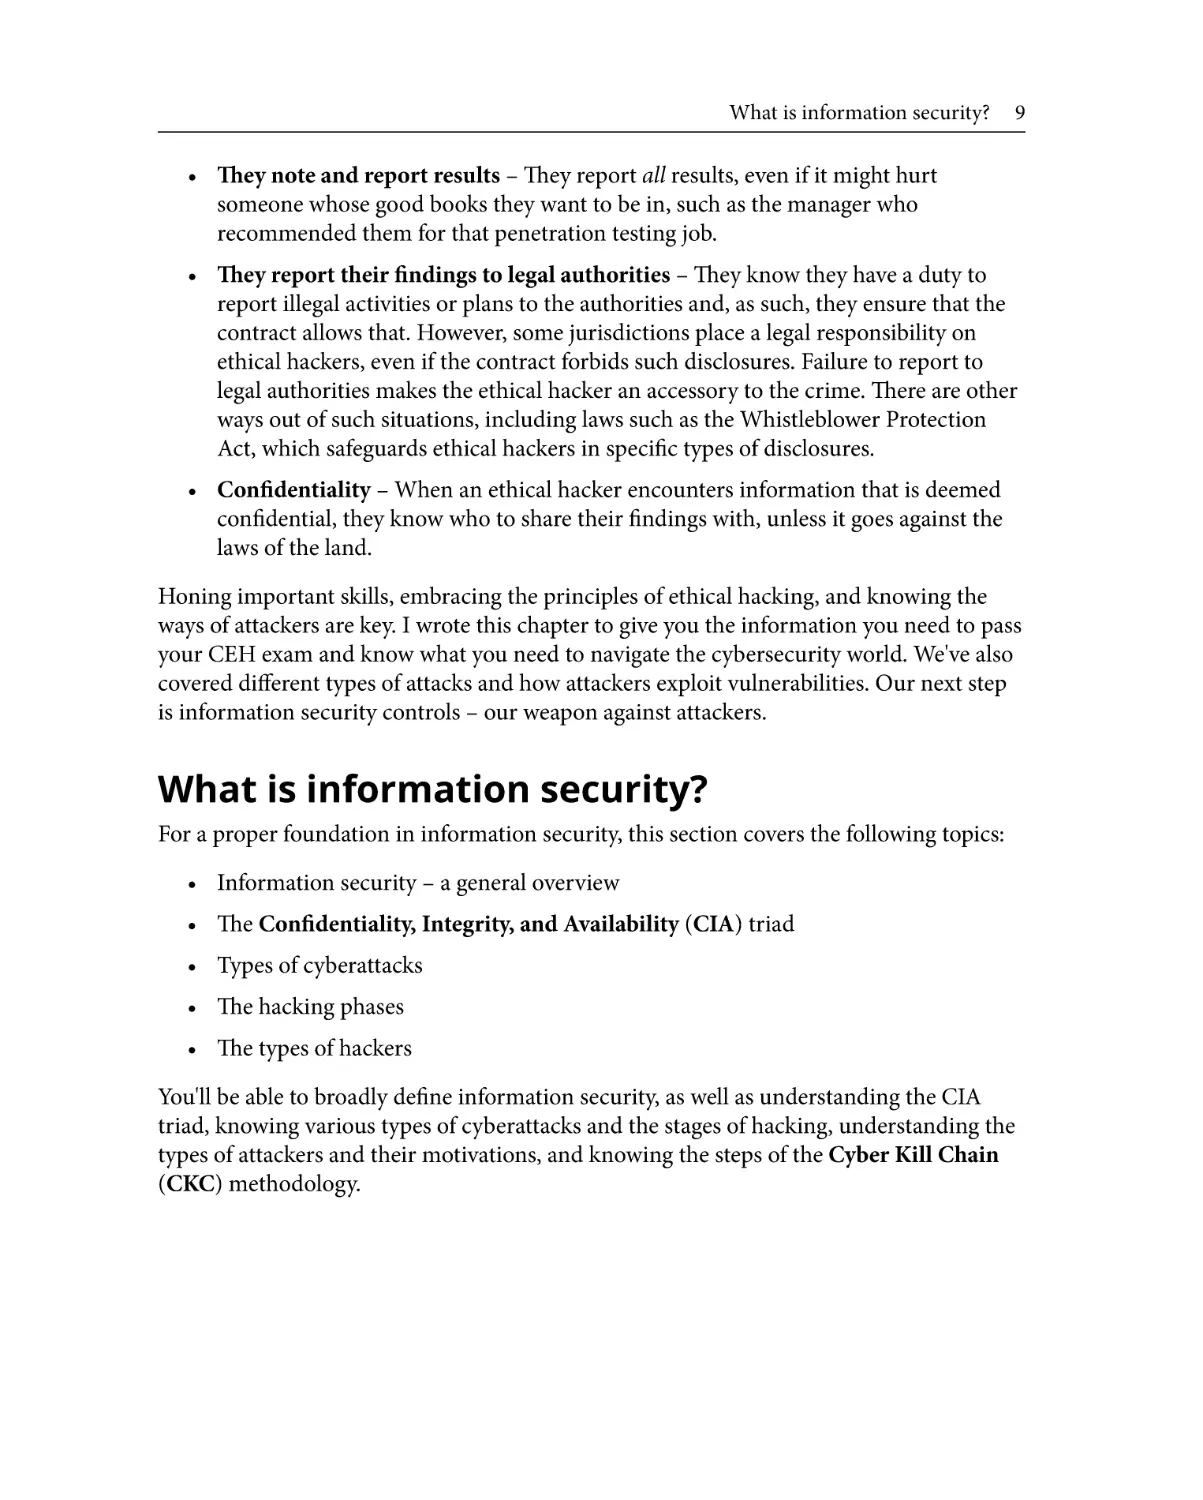 What is information security?